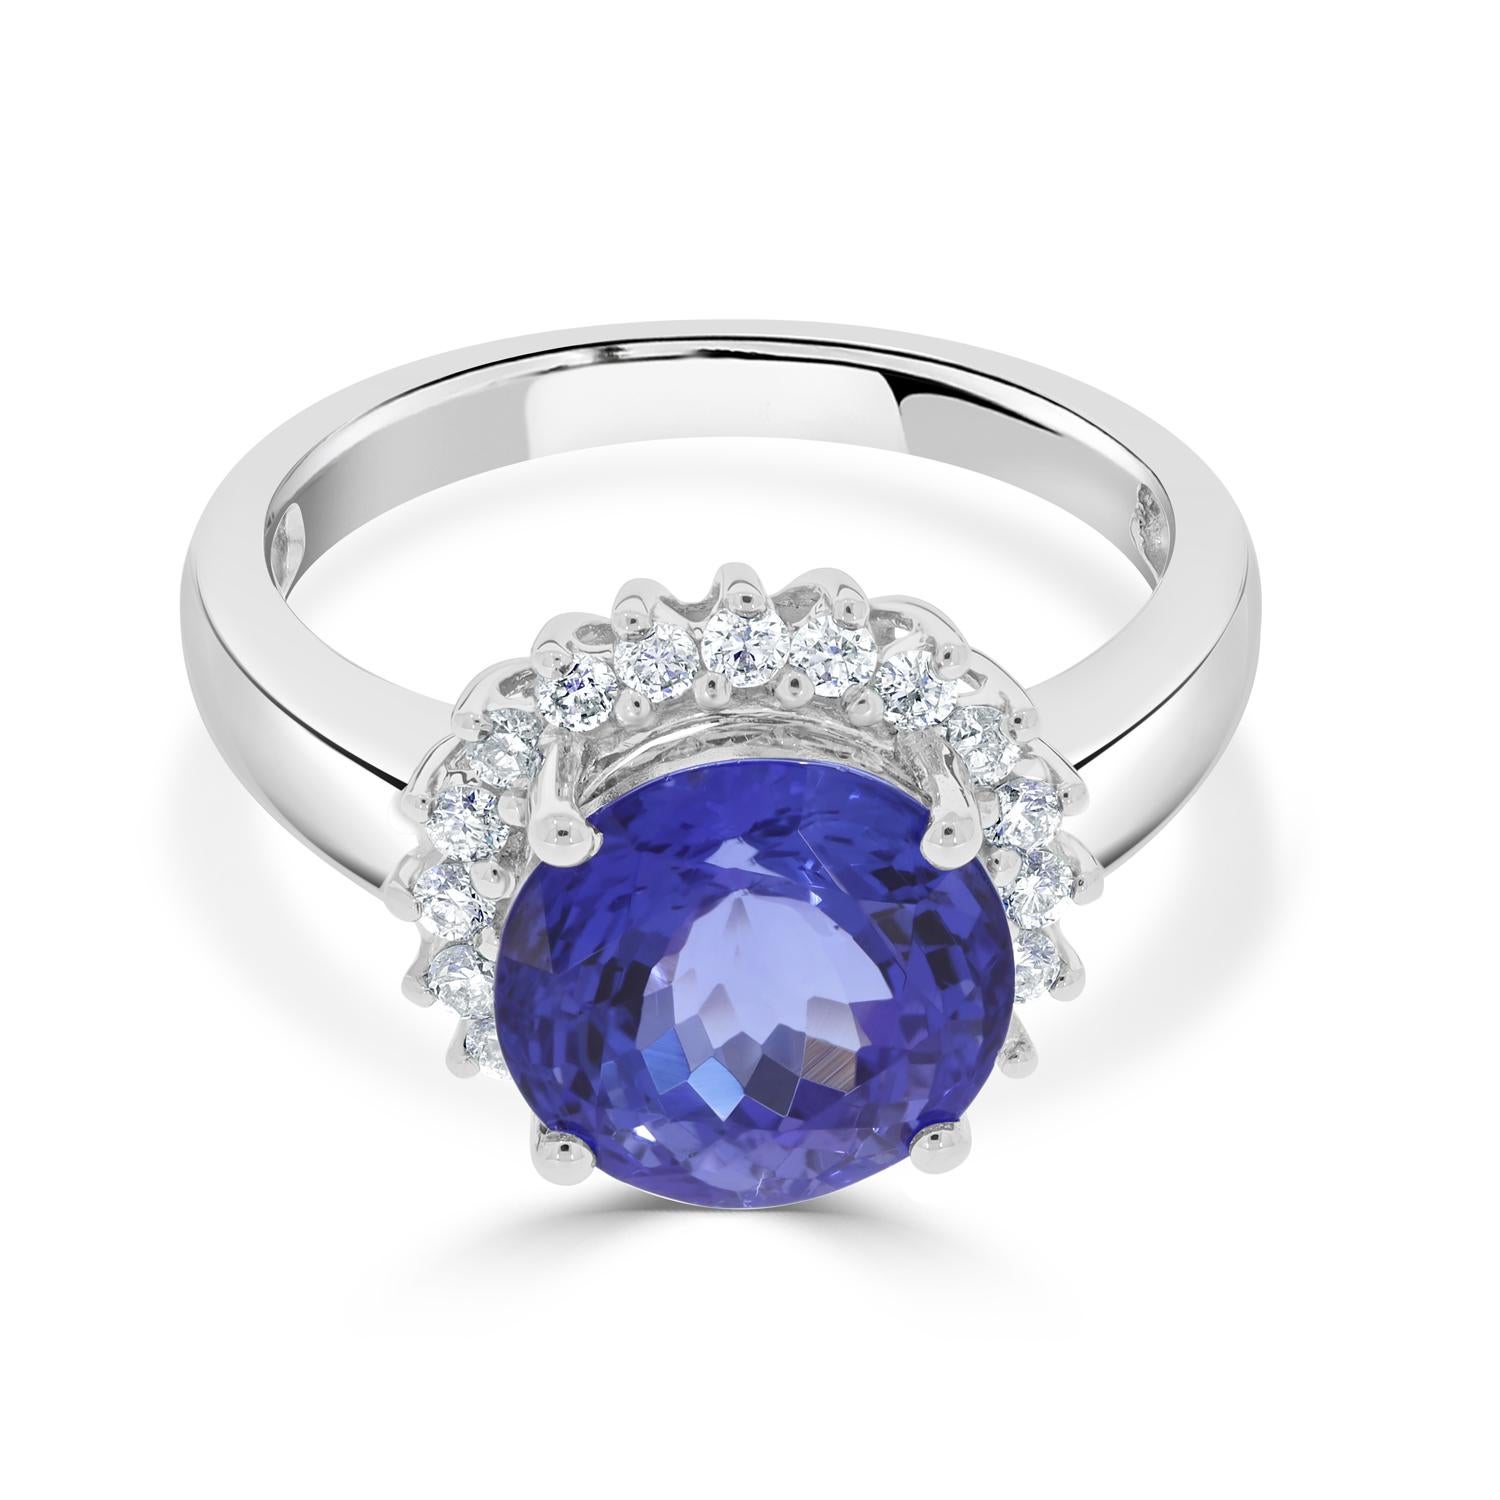 Round Cut Gem Bleu 5.18ct Tanzanite Ring with 0.36 Tct Diamonds Set in 18kt White Gold For Sale